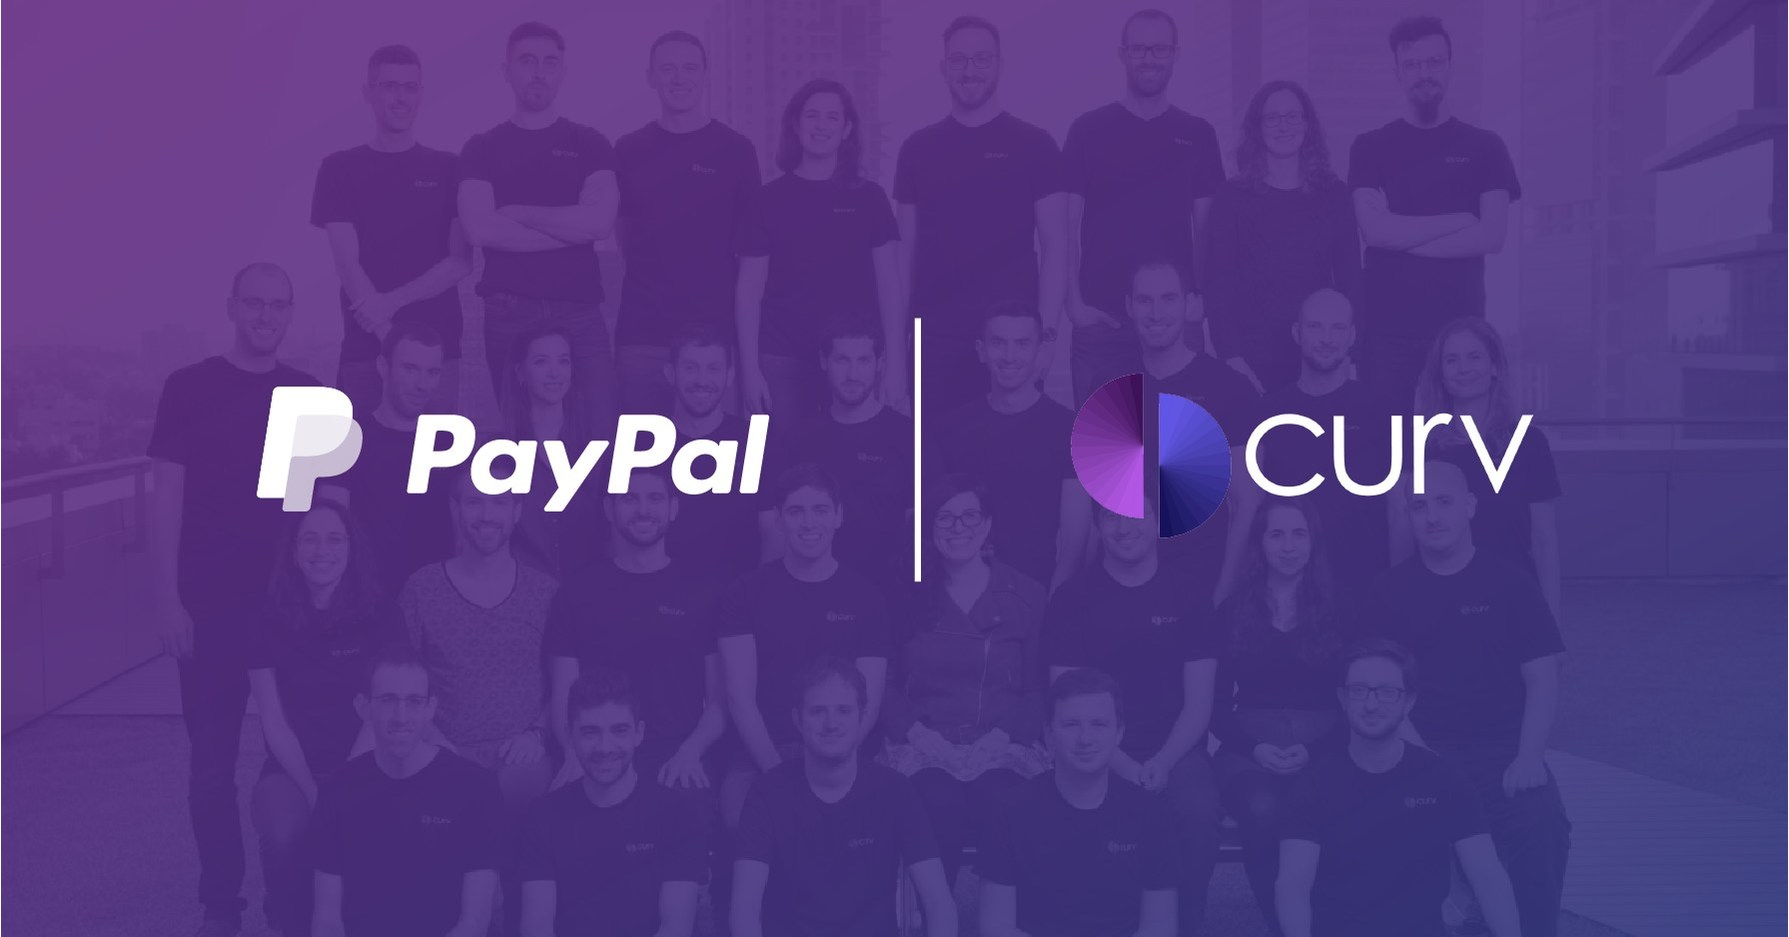 PayPal to acquire Curv